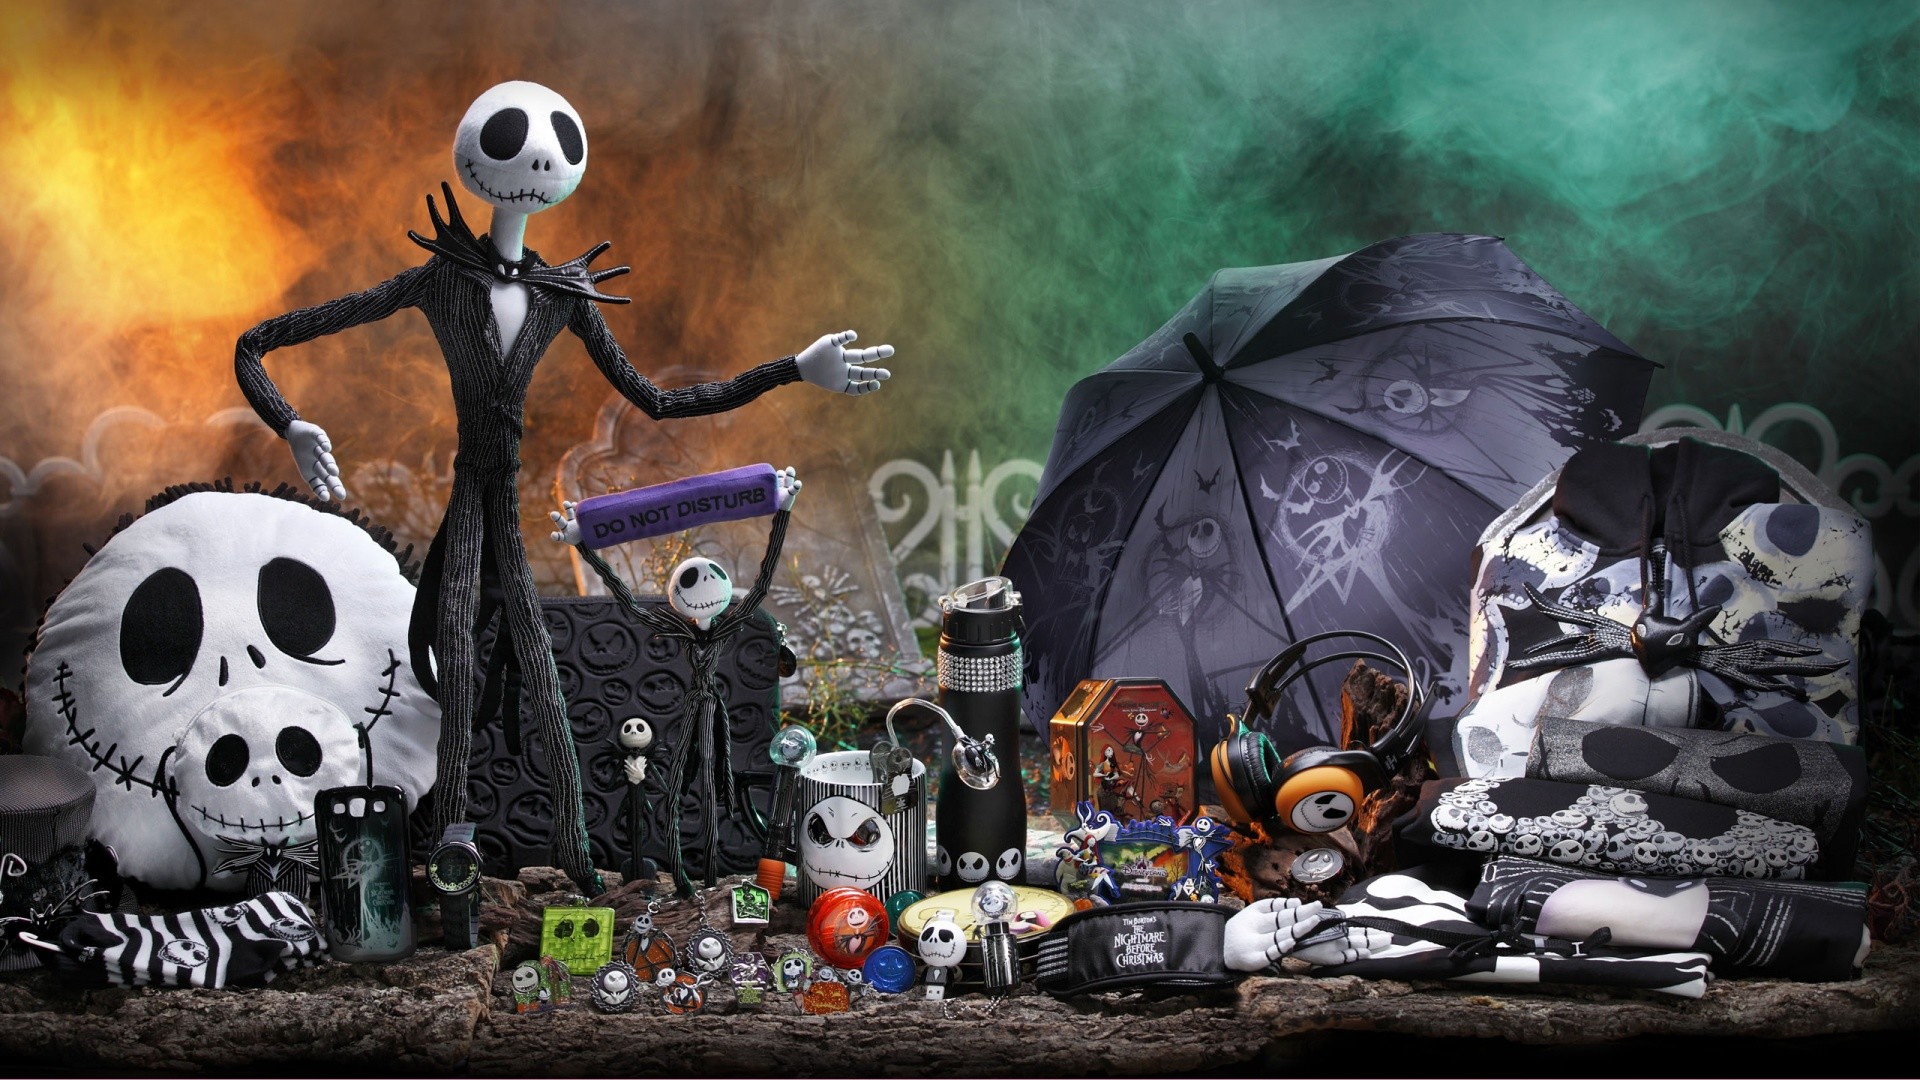 1920x1080 The-Nightmare-Before-Christmas-HD-wallpaper-wp1209965 .